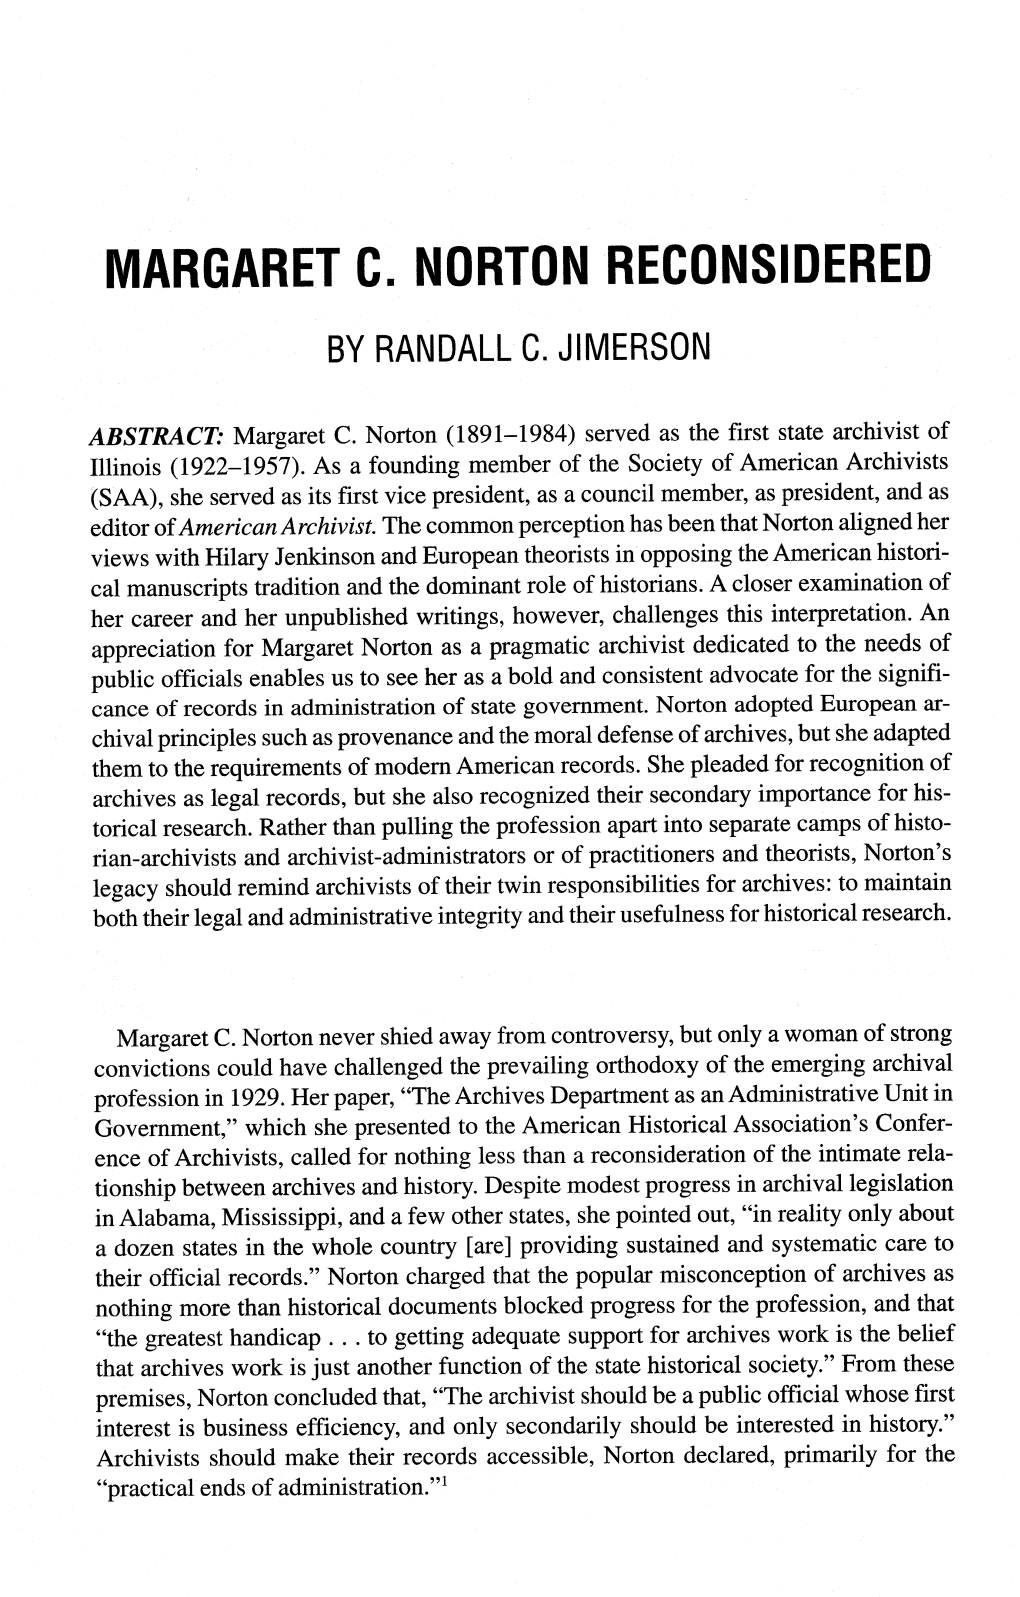 Margaret C. Norton Reconsidered by Randall C.Jimerson